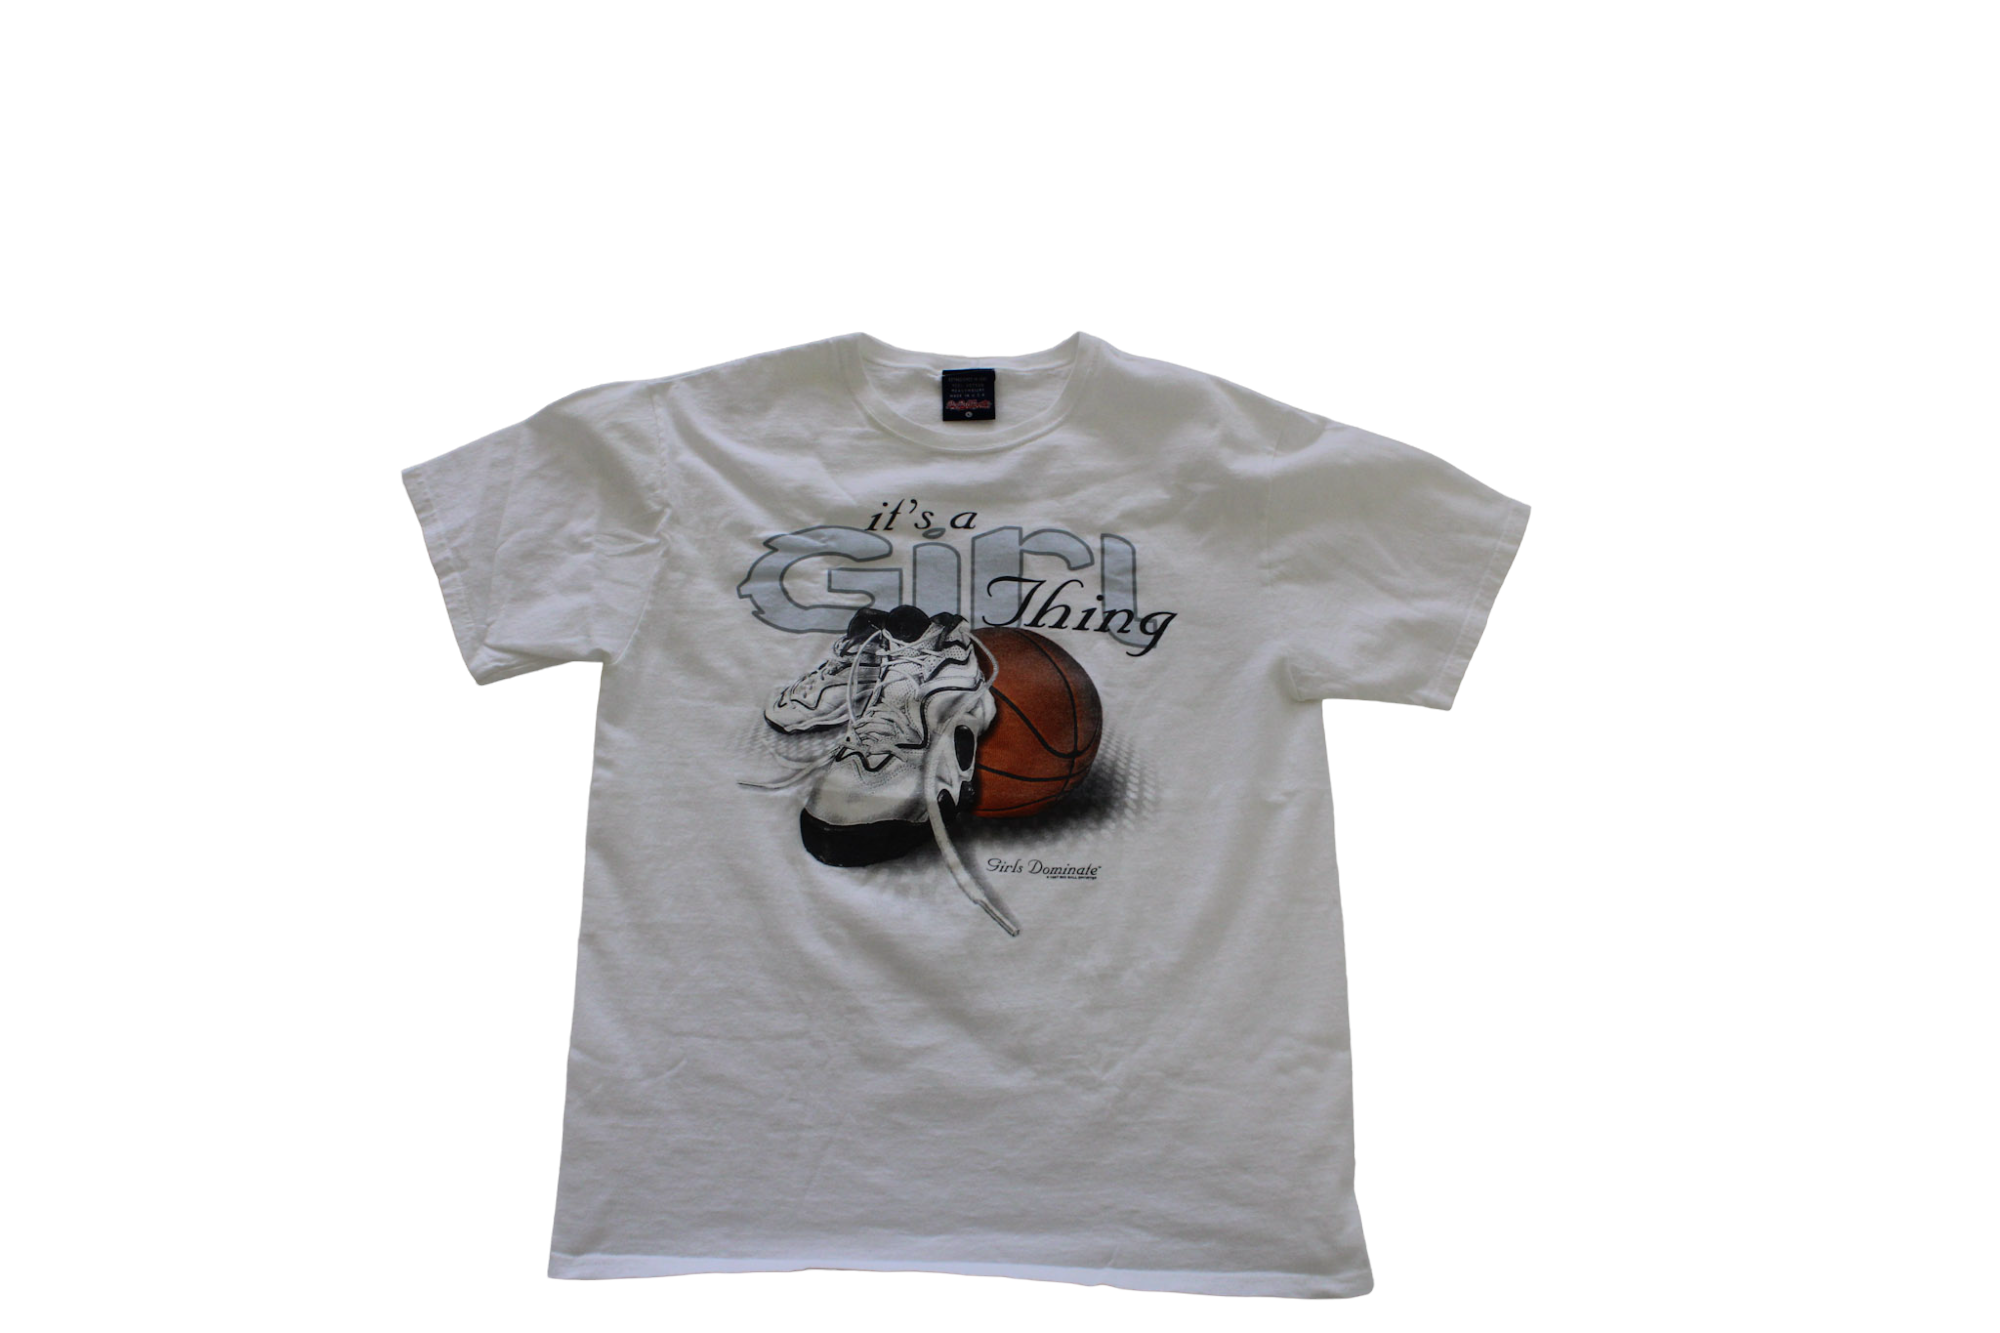 Vintage 90s "It's a girl thing' Basketball Tee